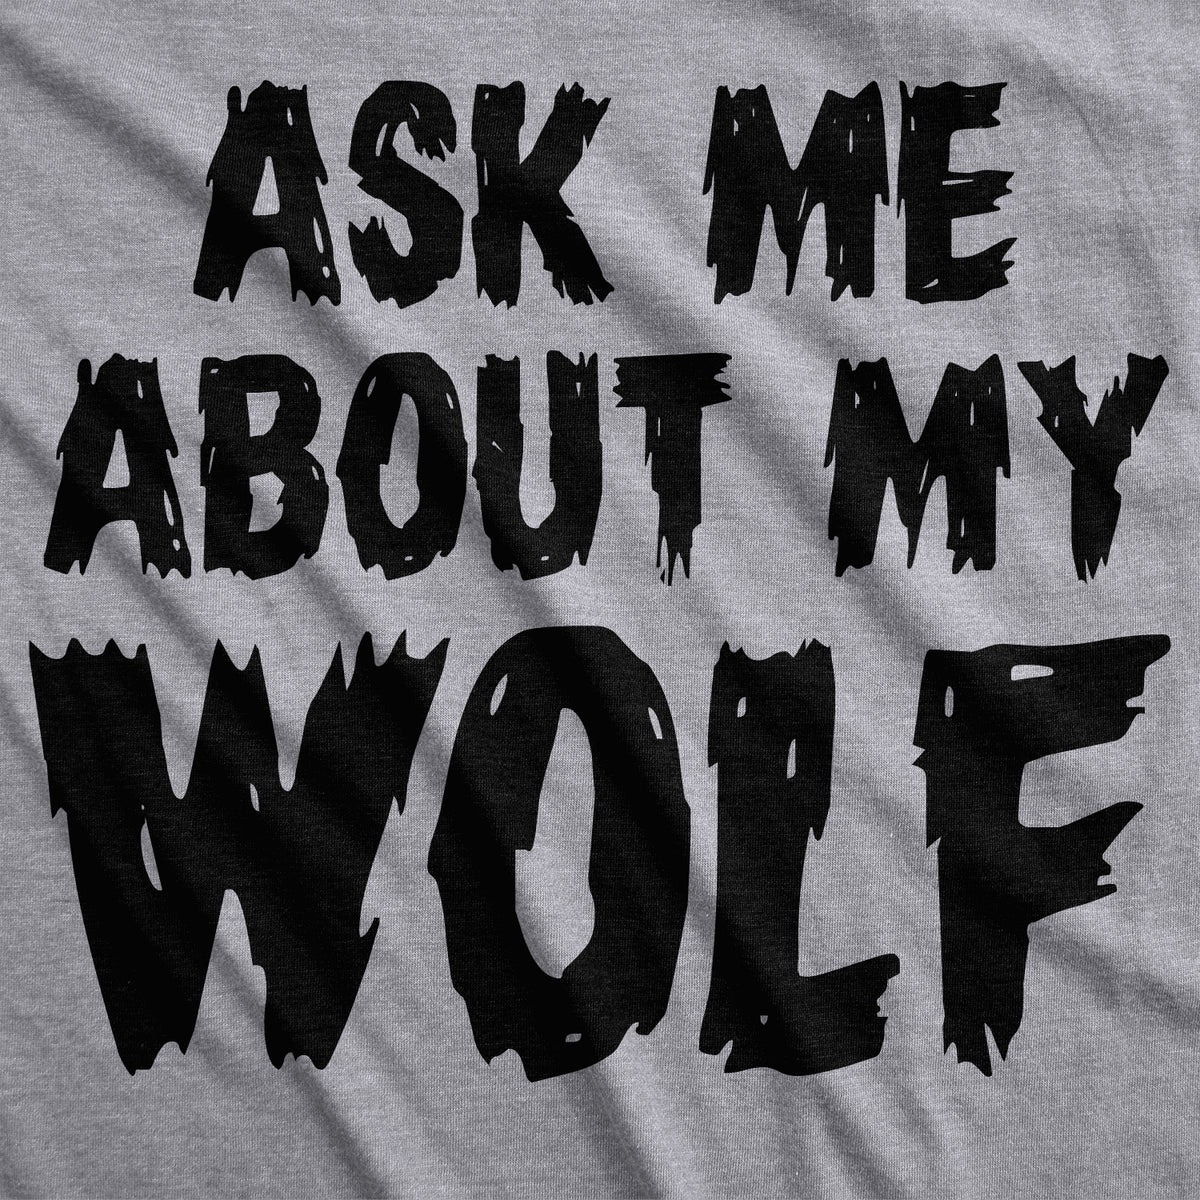 Ask Me About My Wolf Flip Men&#39;s Tshirt